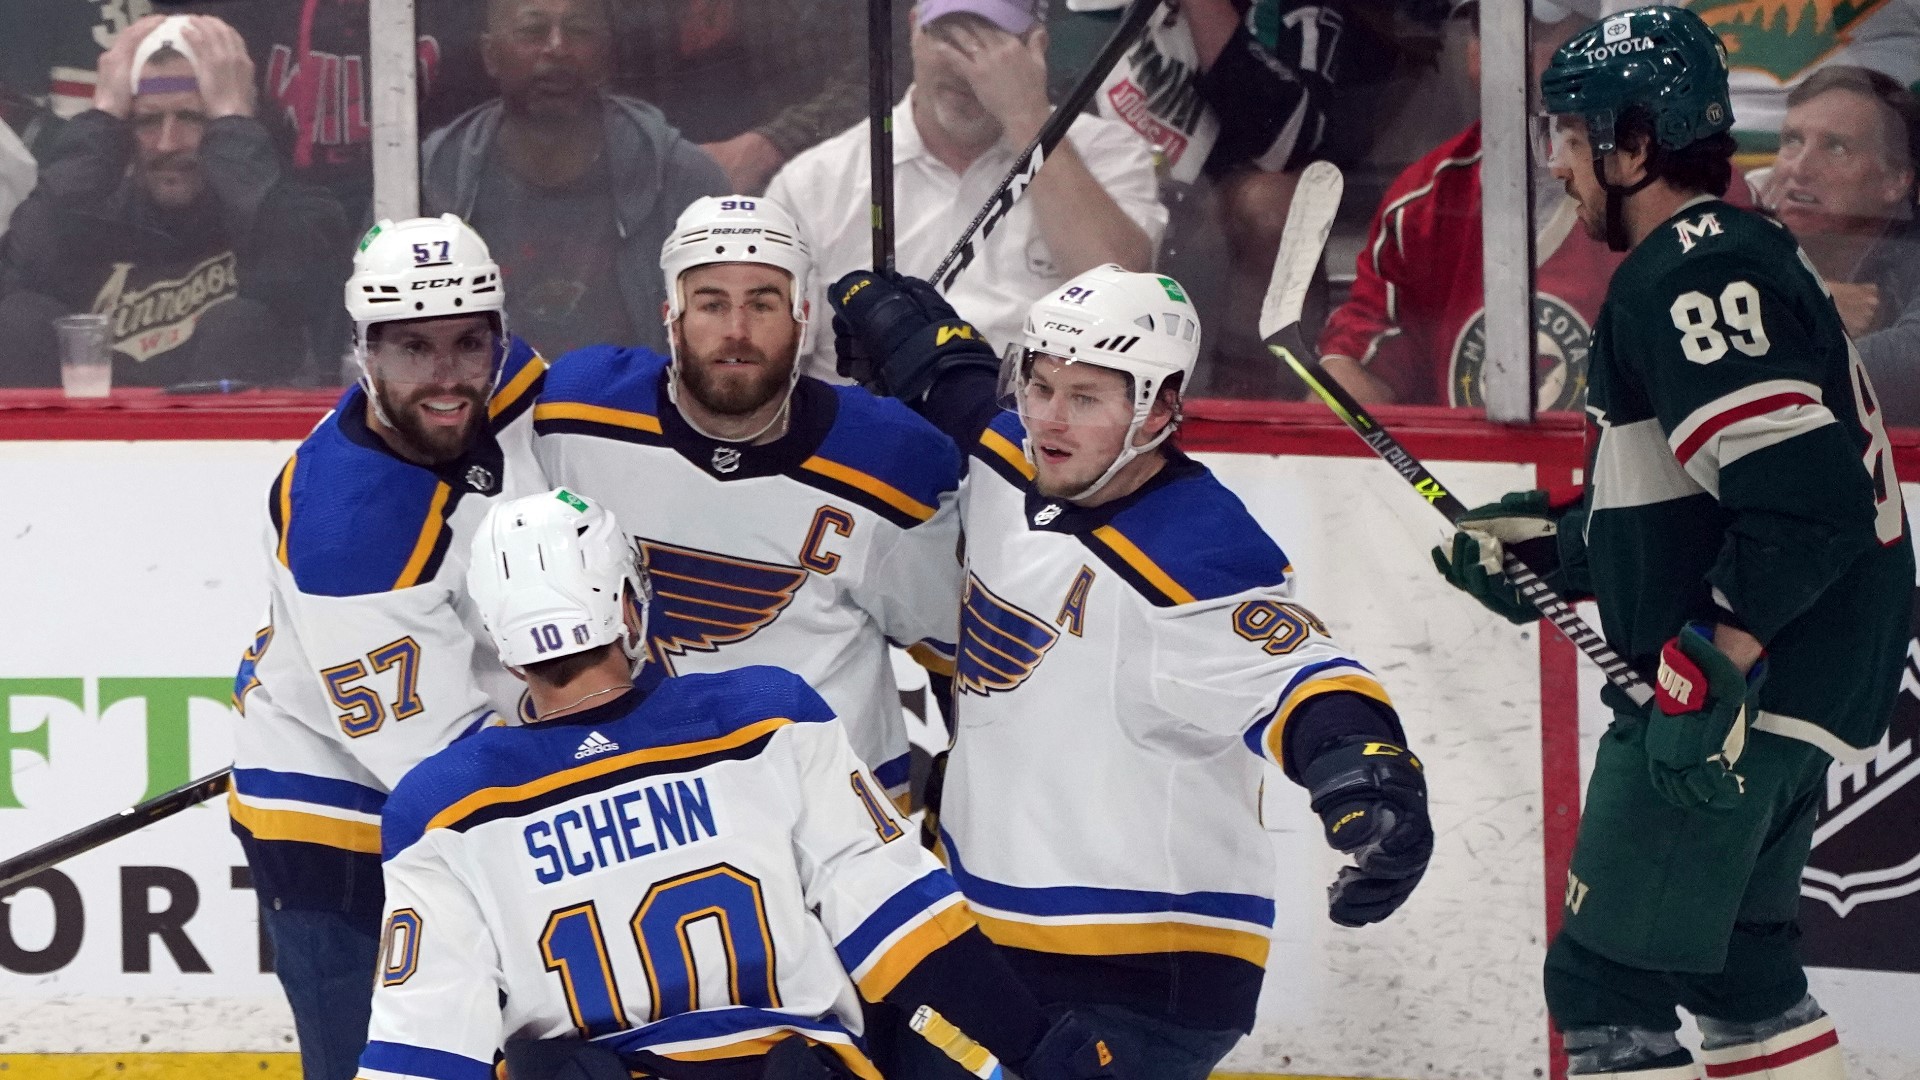 "Only wins matter," Tarasenko said of the St. Louis Blues win Tuesday night. Tarasenko had a hat trick in the third period of Game 5 in the first round.